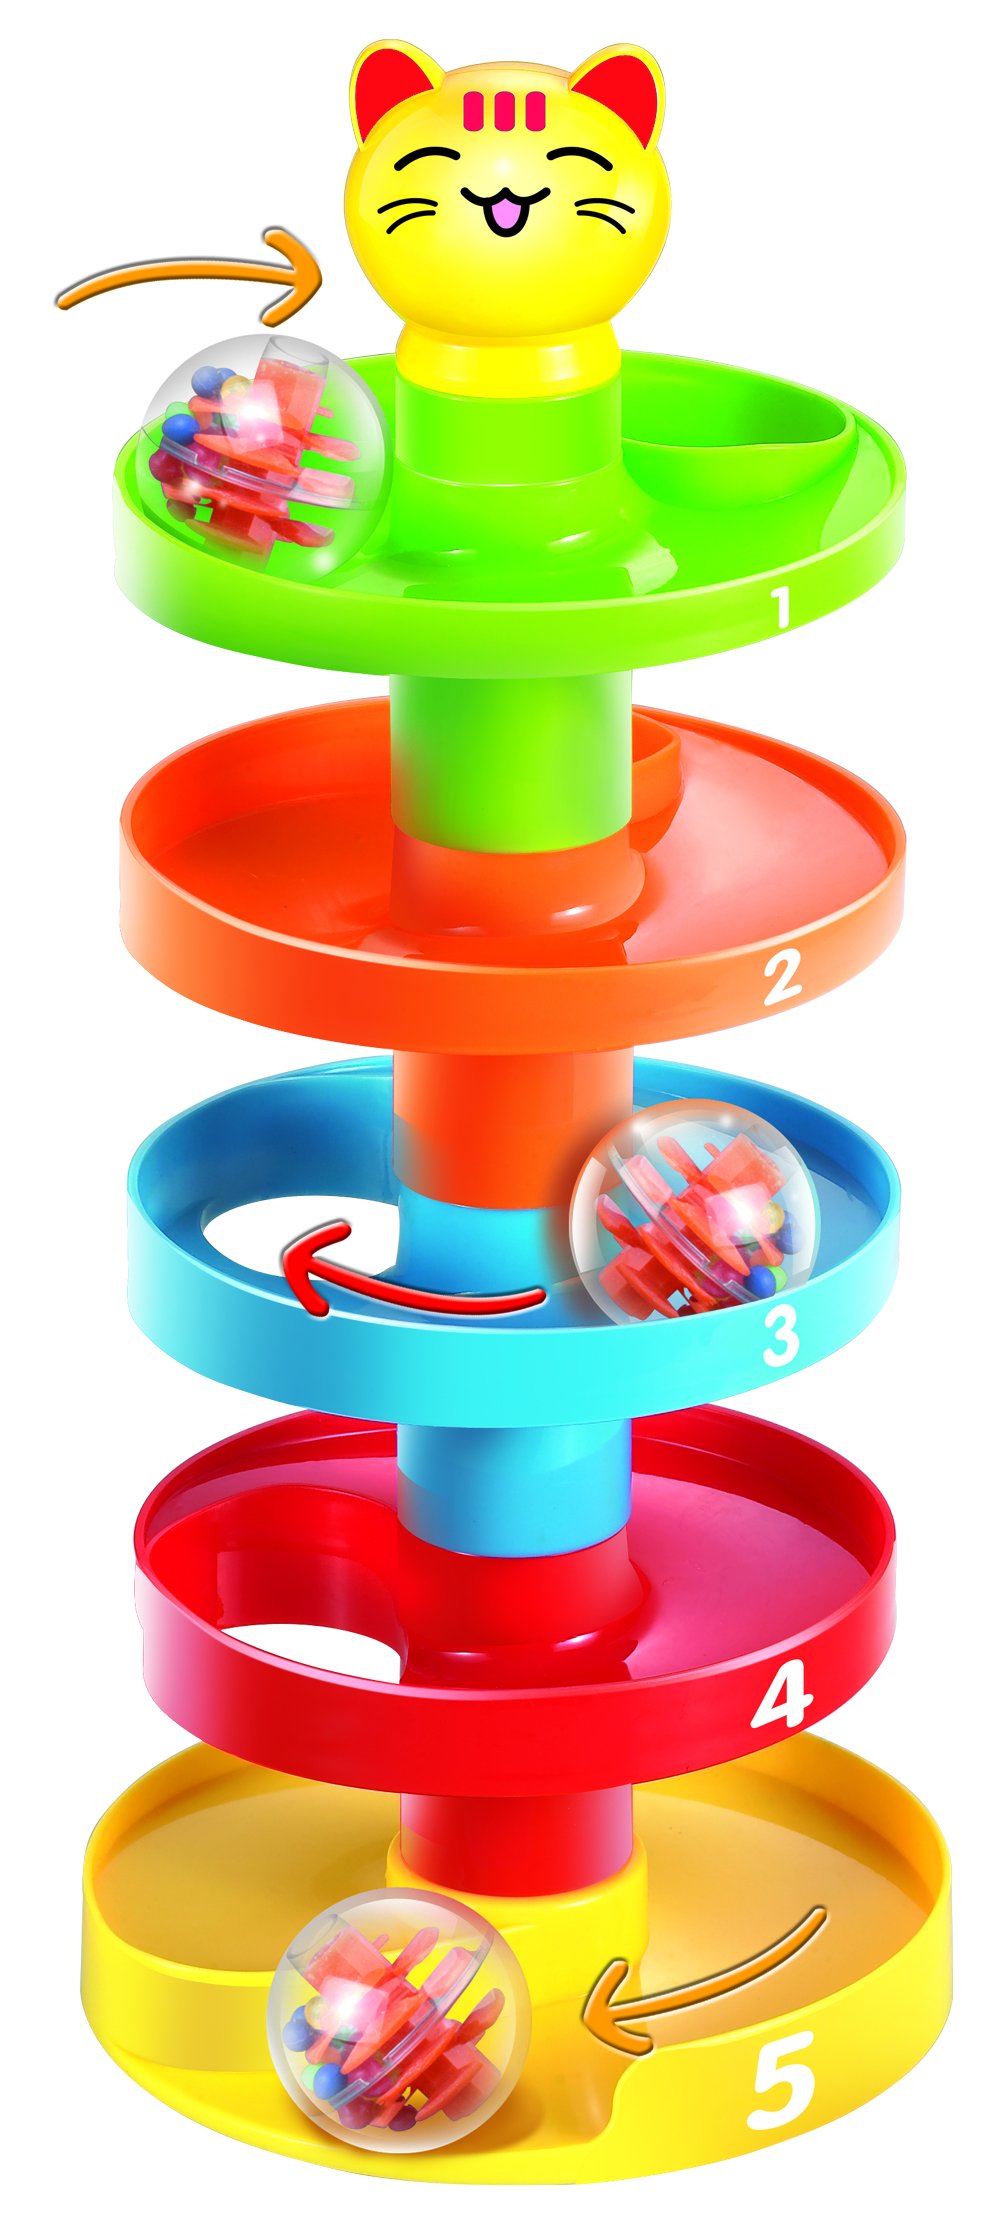 Book Cover 5 Layer Ball Drop and Roll Swirling Tower for Baby and Toddler Development Educational Toys | Stack, Drop and Go Ball Ramp Toy Set Includes 3 Spinning Acrylic Activity Balls with Colorful Beads 5 Layer - Ball Drop